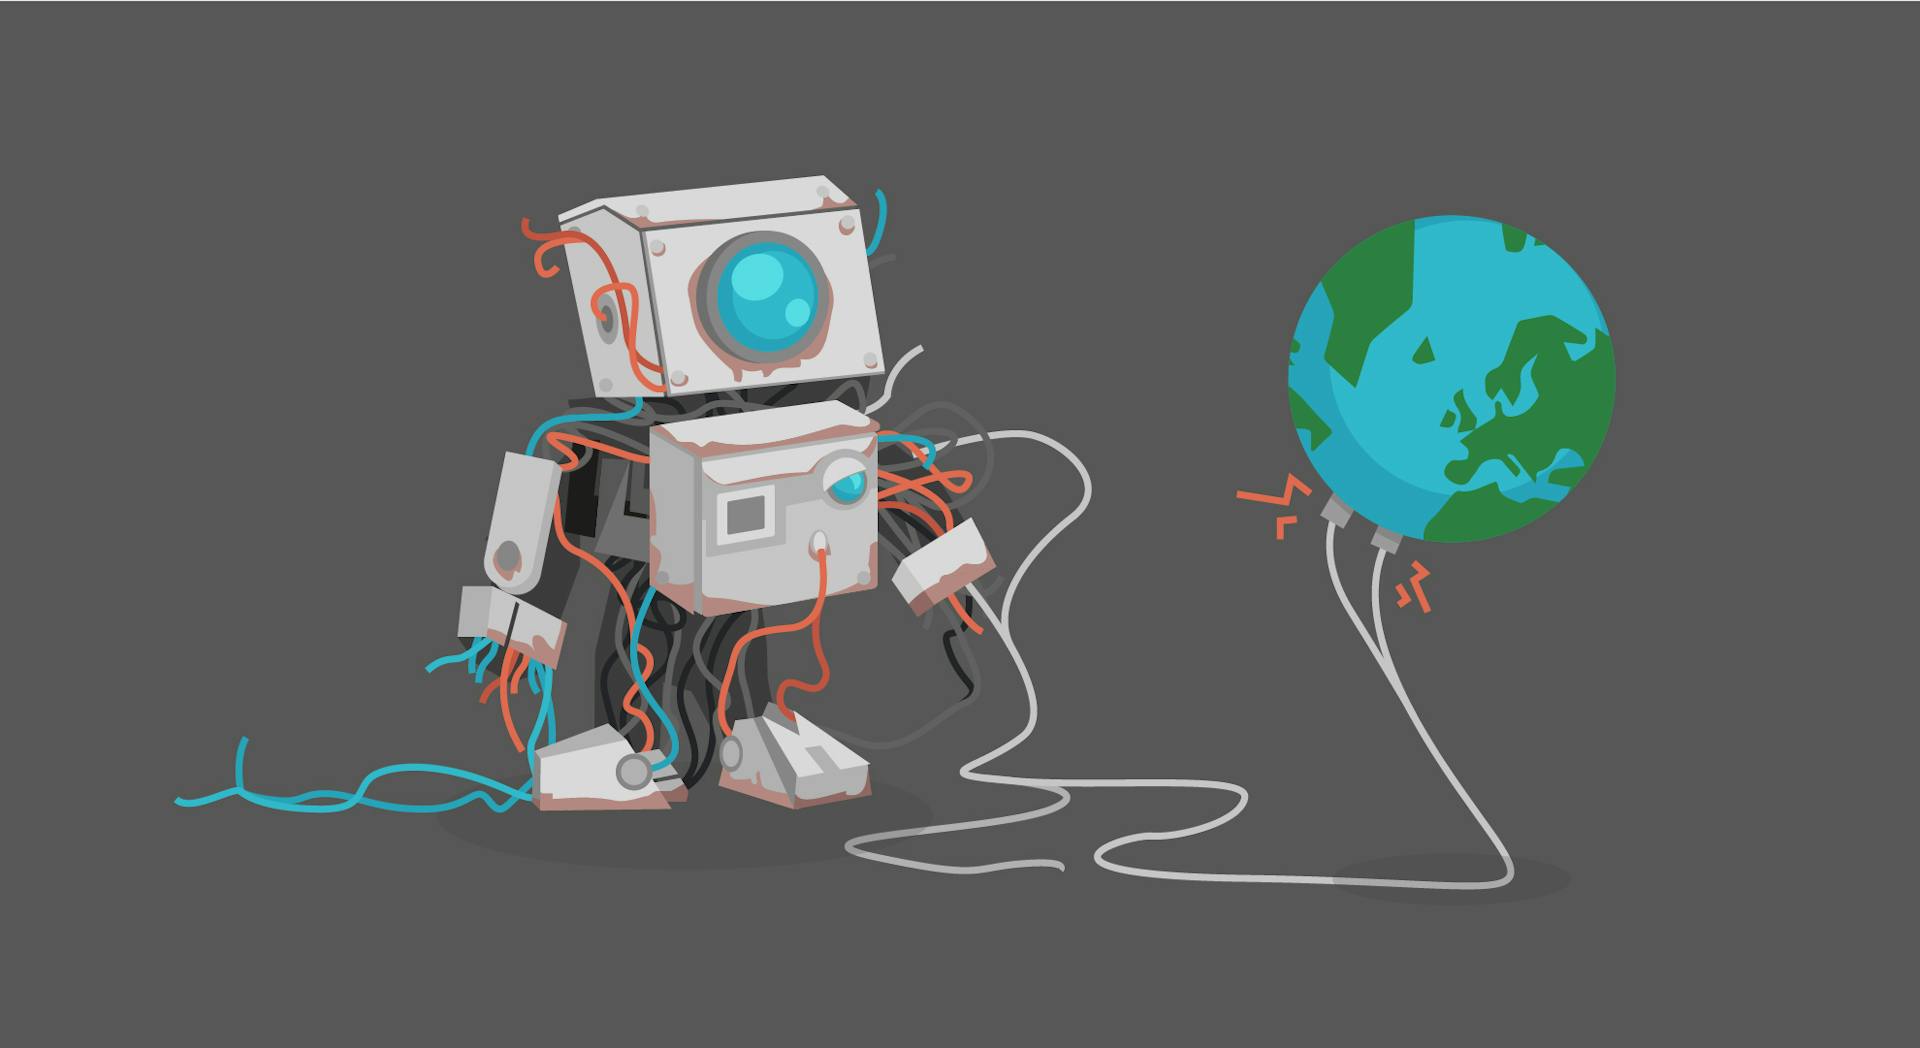 A rusty robot, plugged into a floating globe